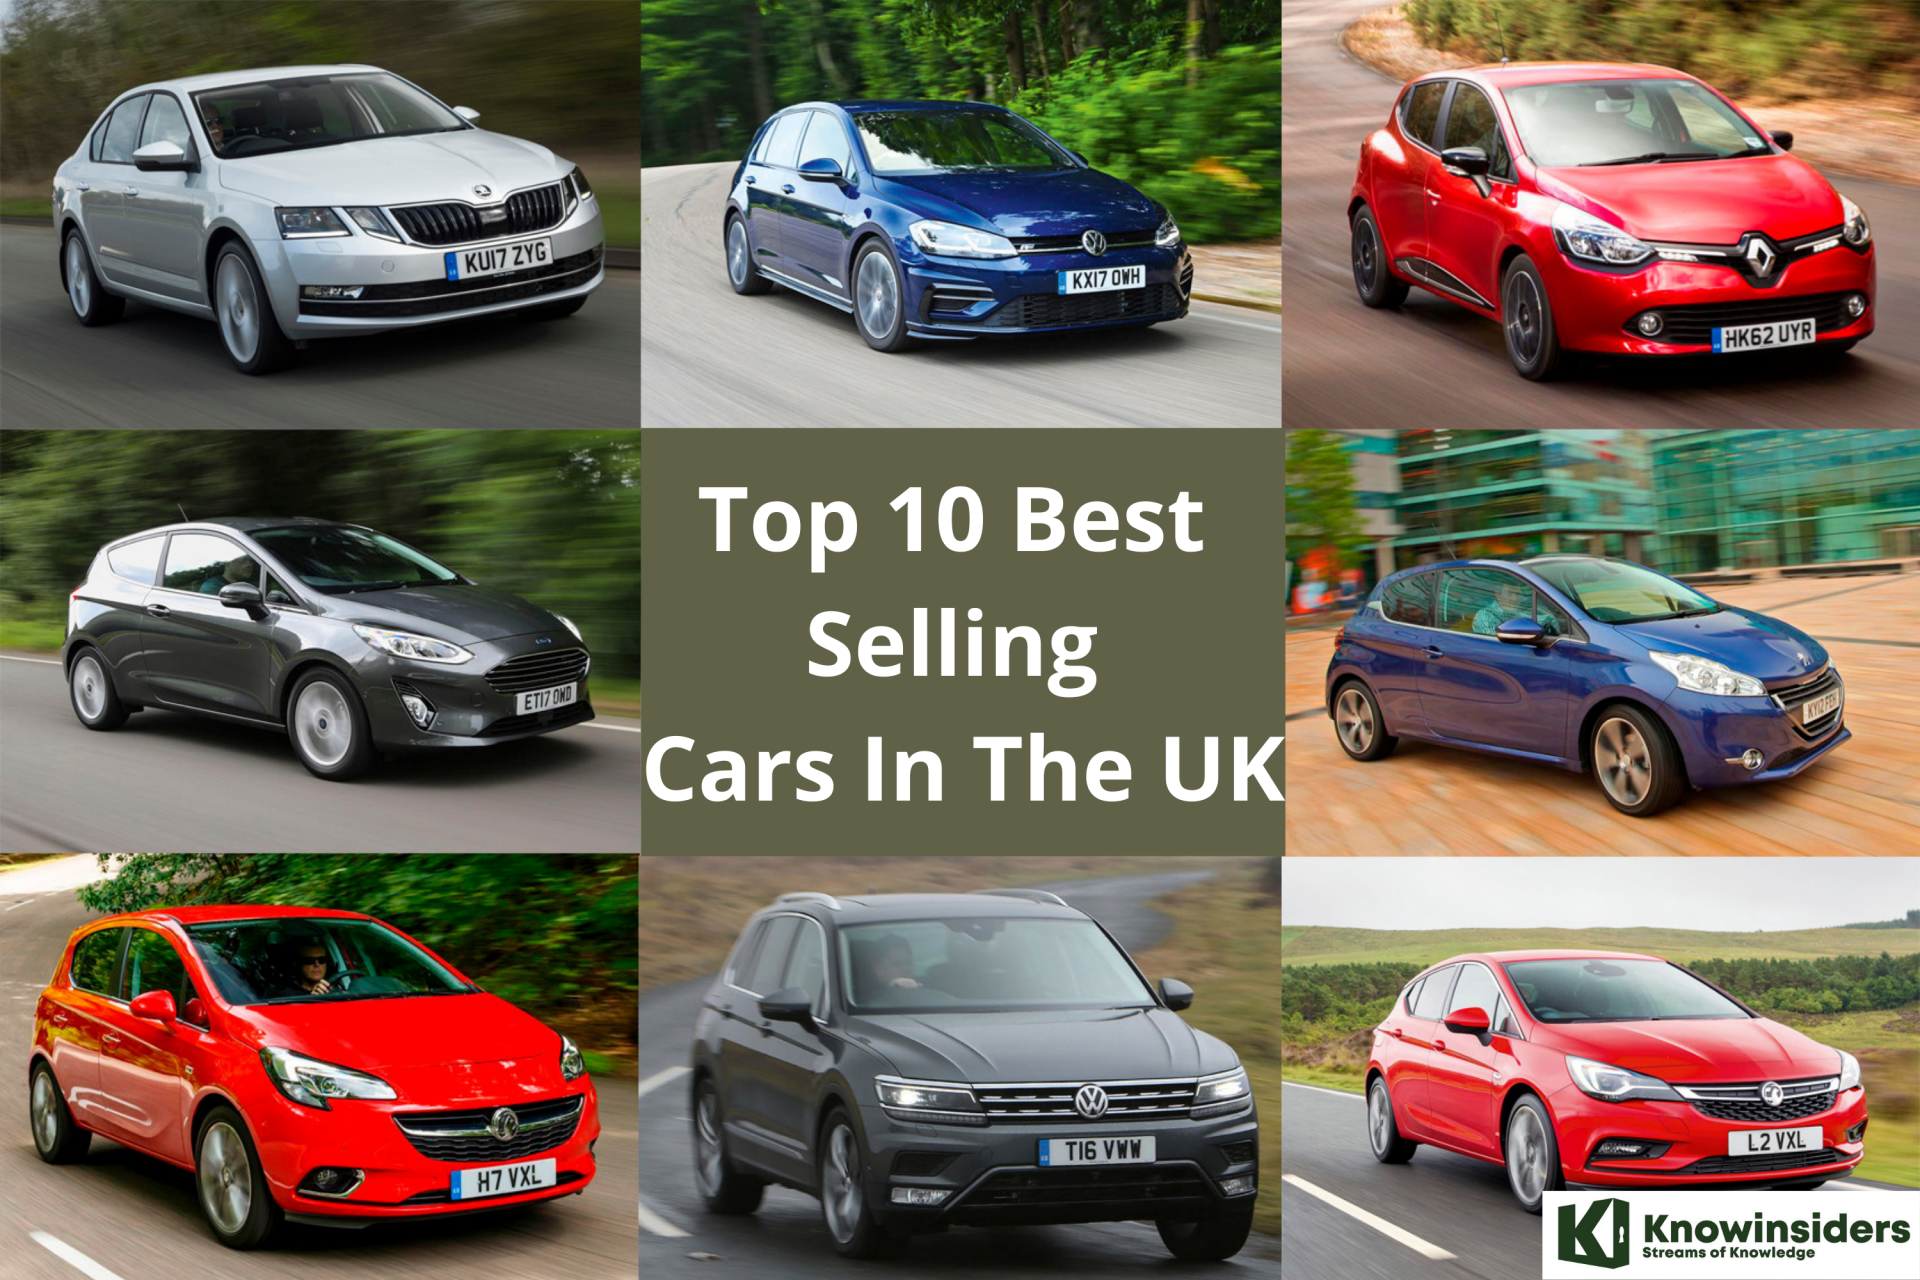 Top 10 Best-selling Cars In The UK